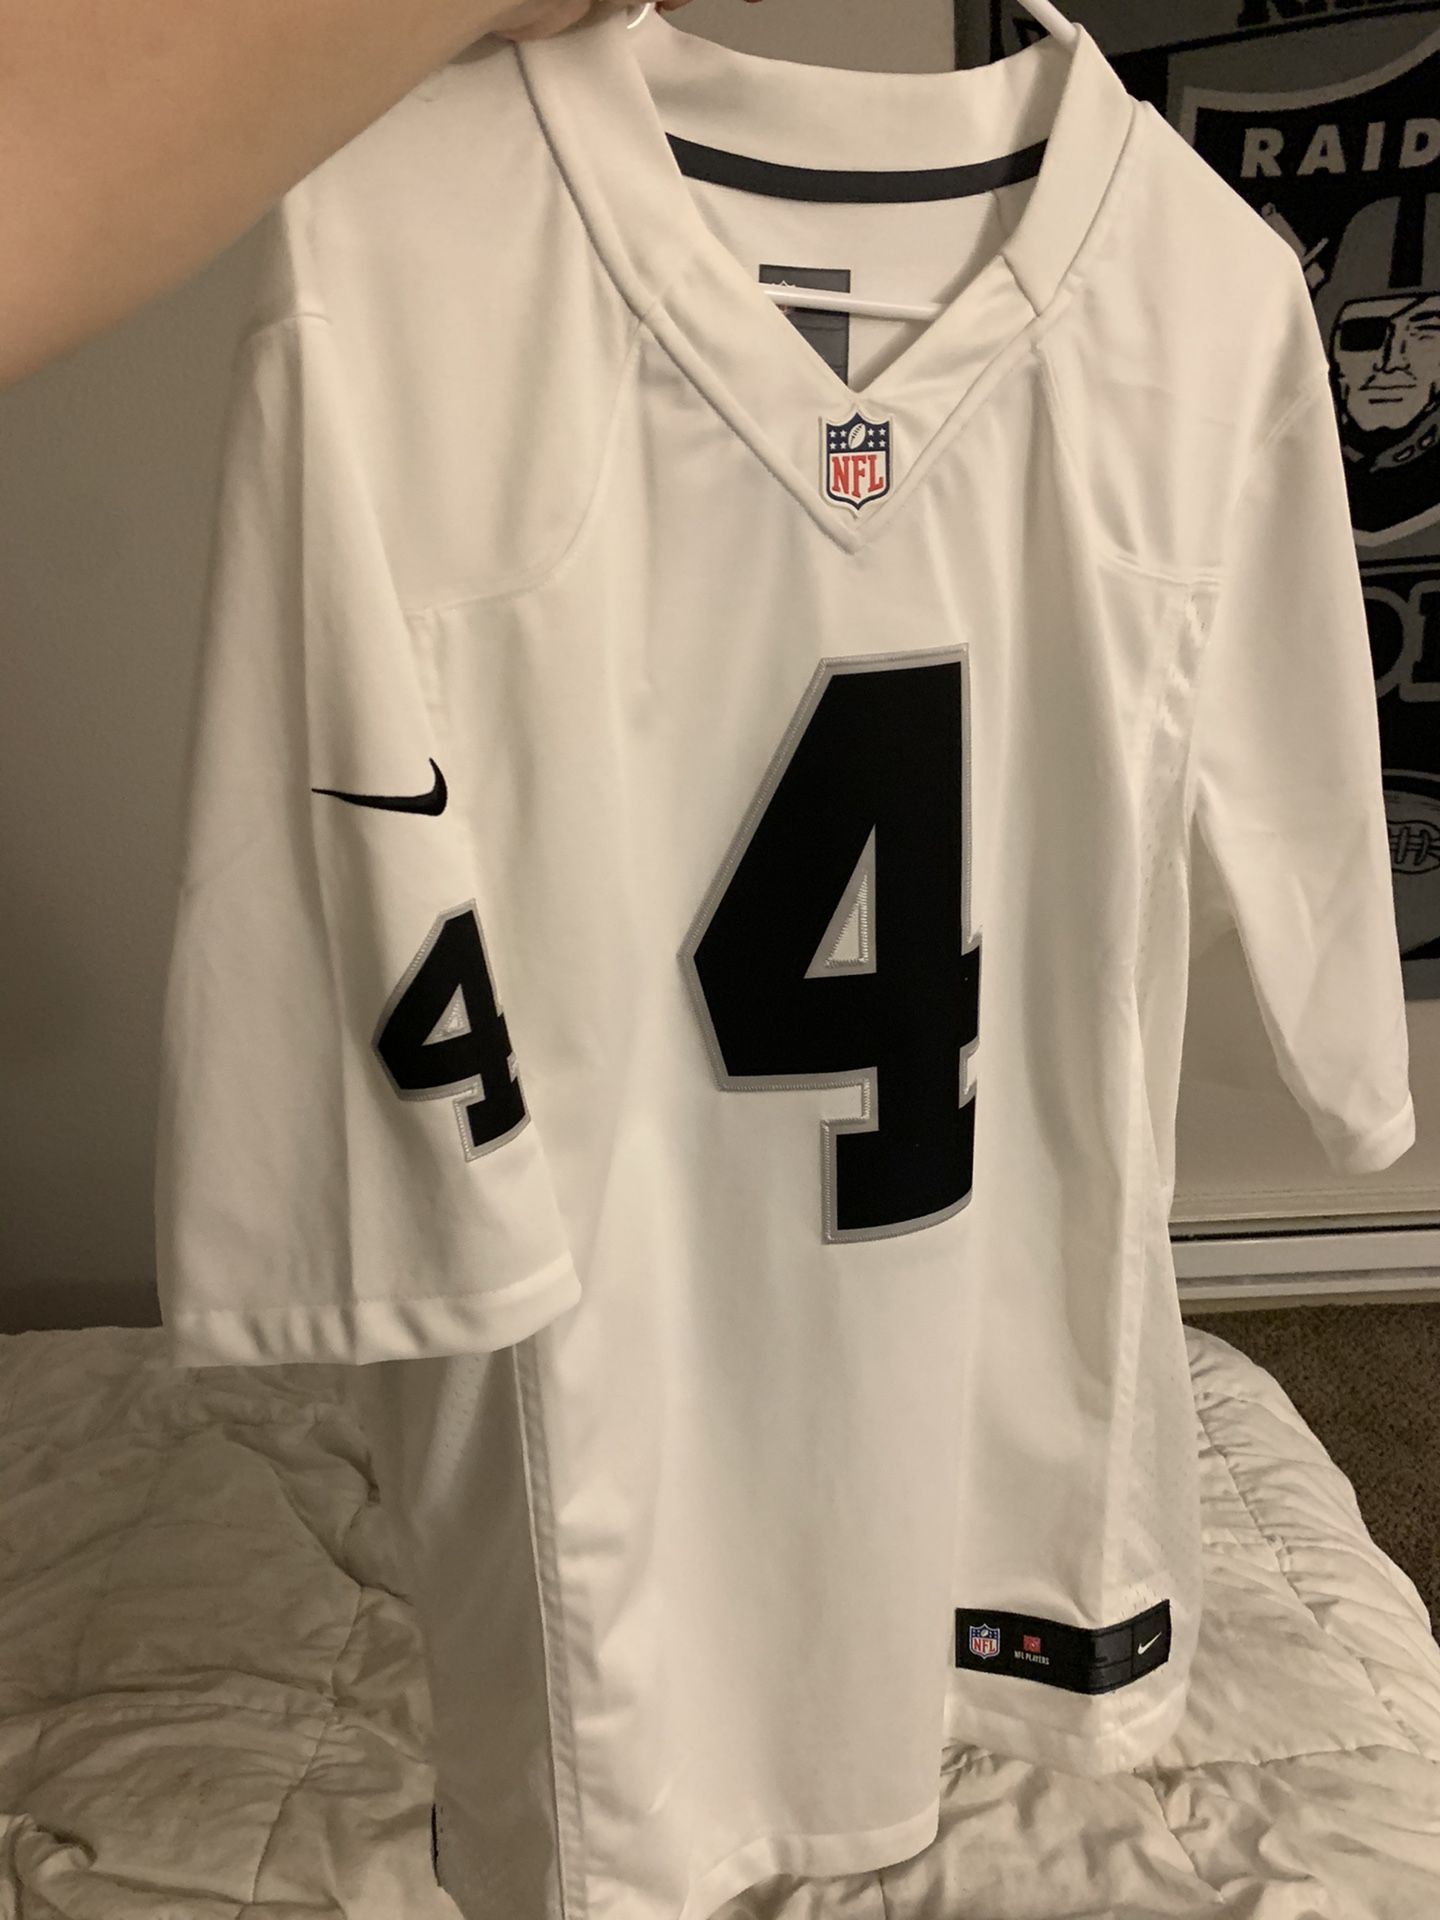 Raiders Carr jersey size Large